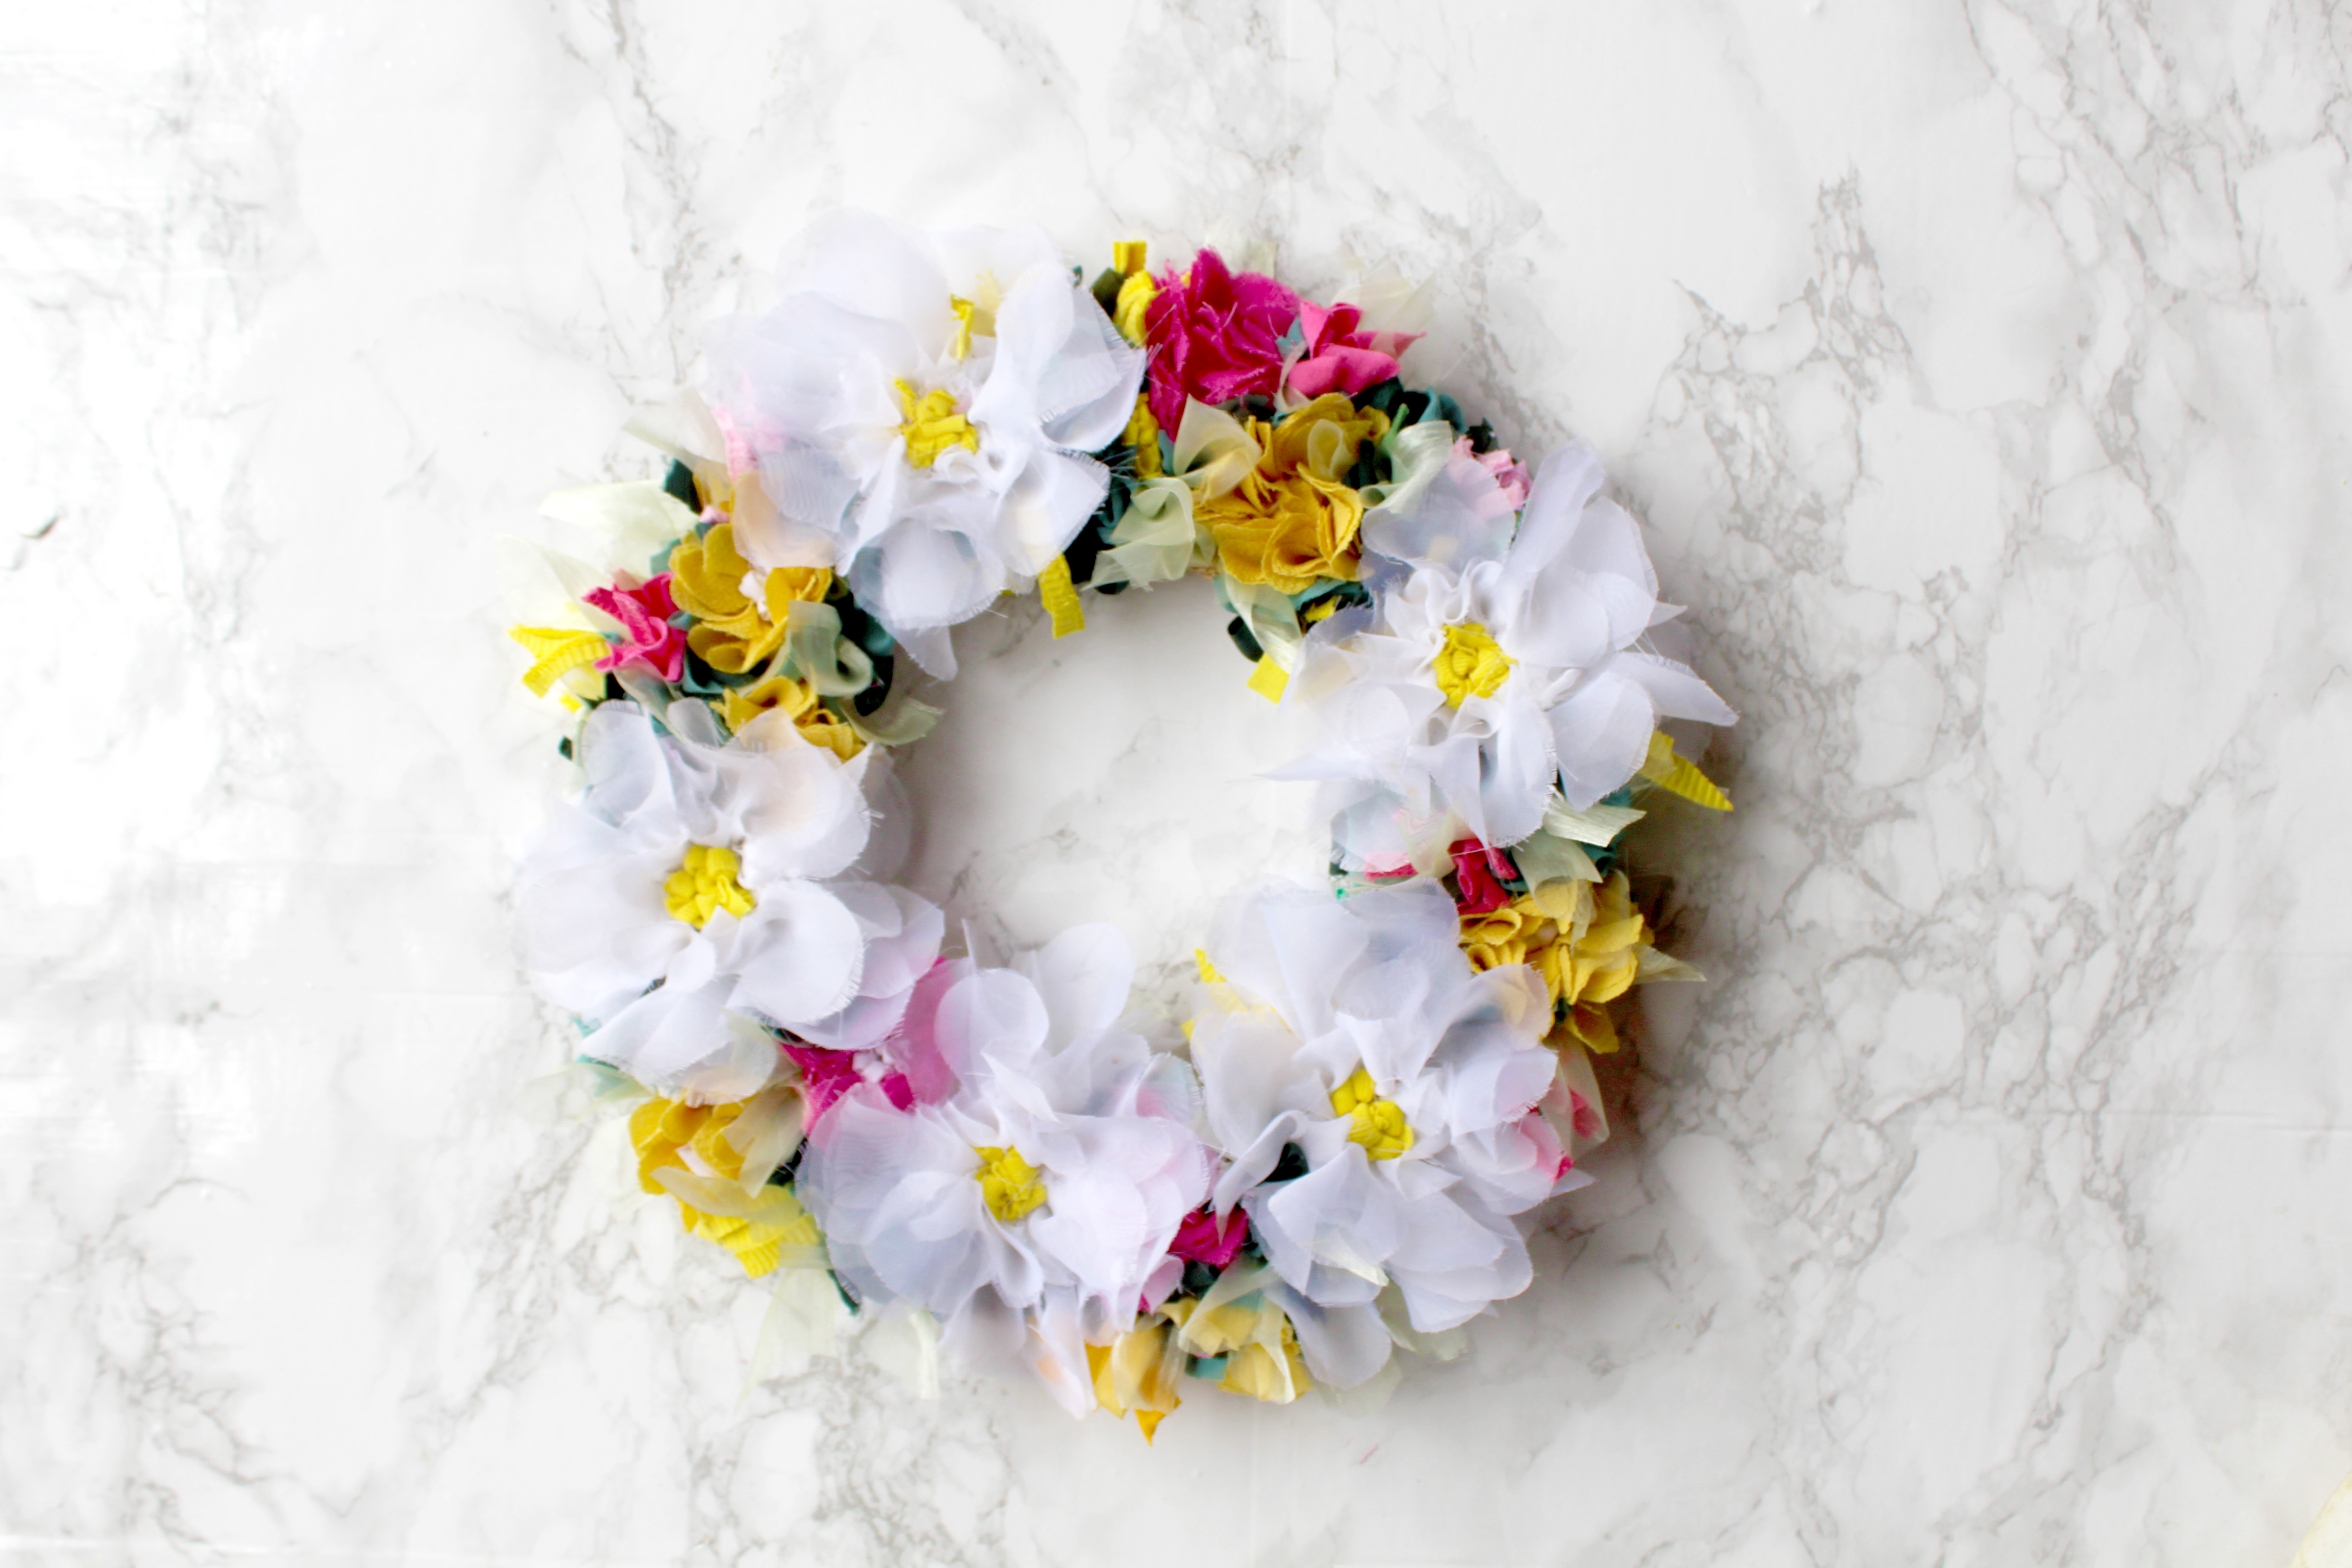 Ragged Life spring rag rug wreath made using recycled material with white flowers and pink and green foliage. 